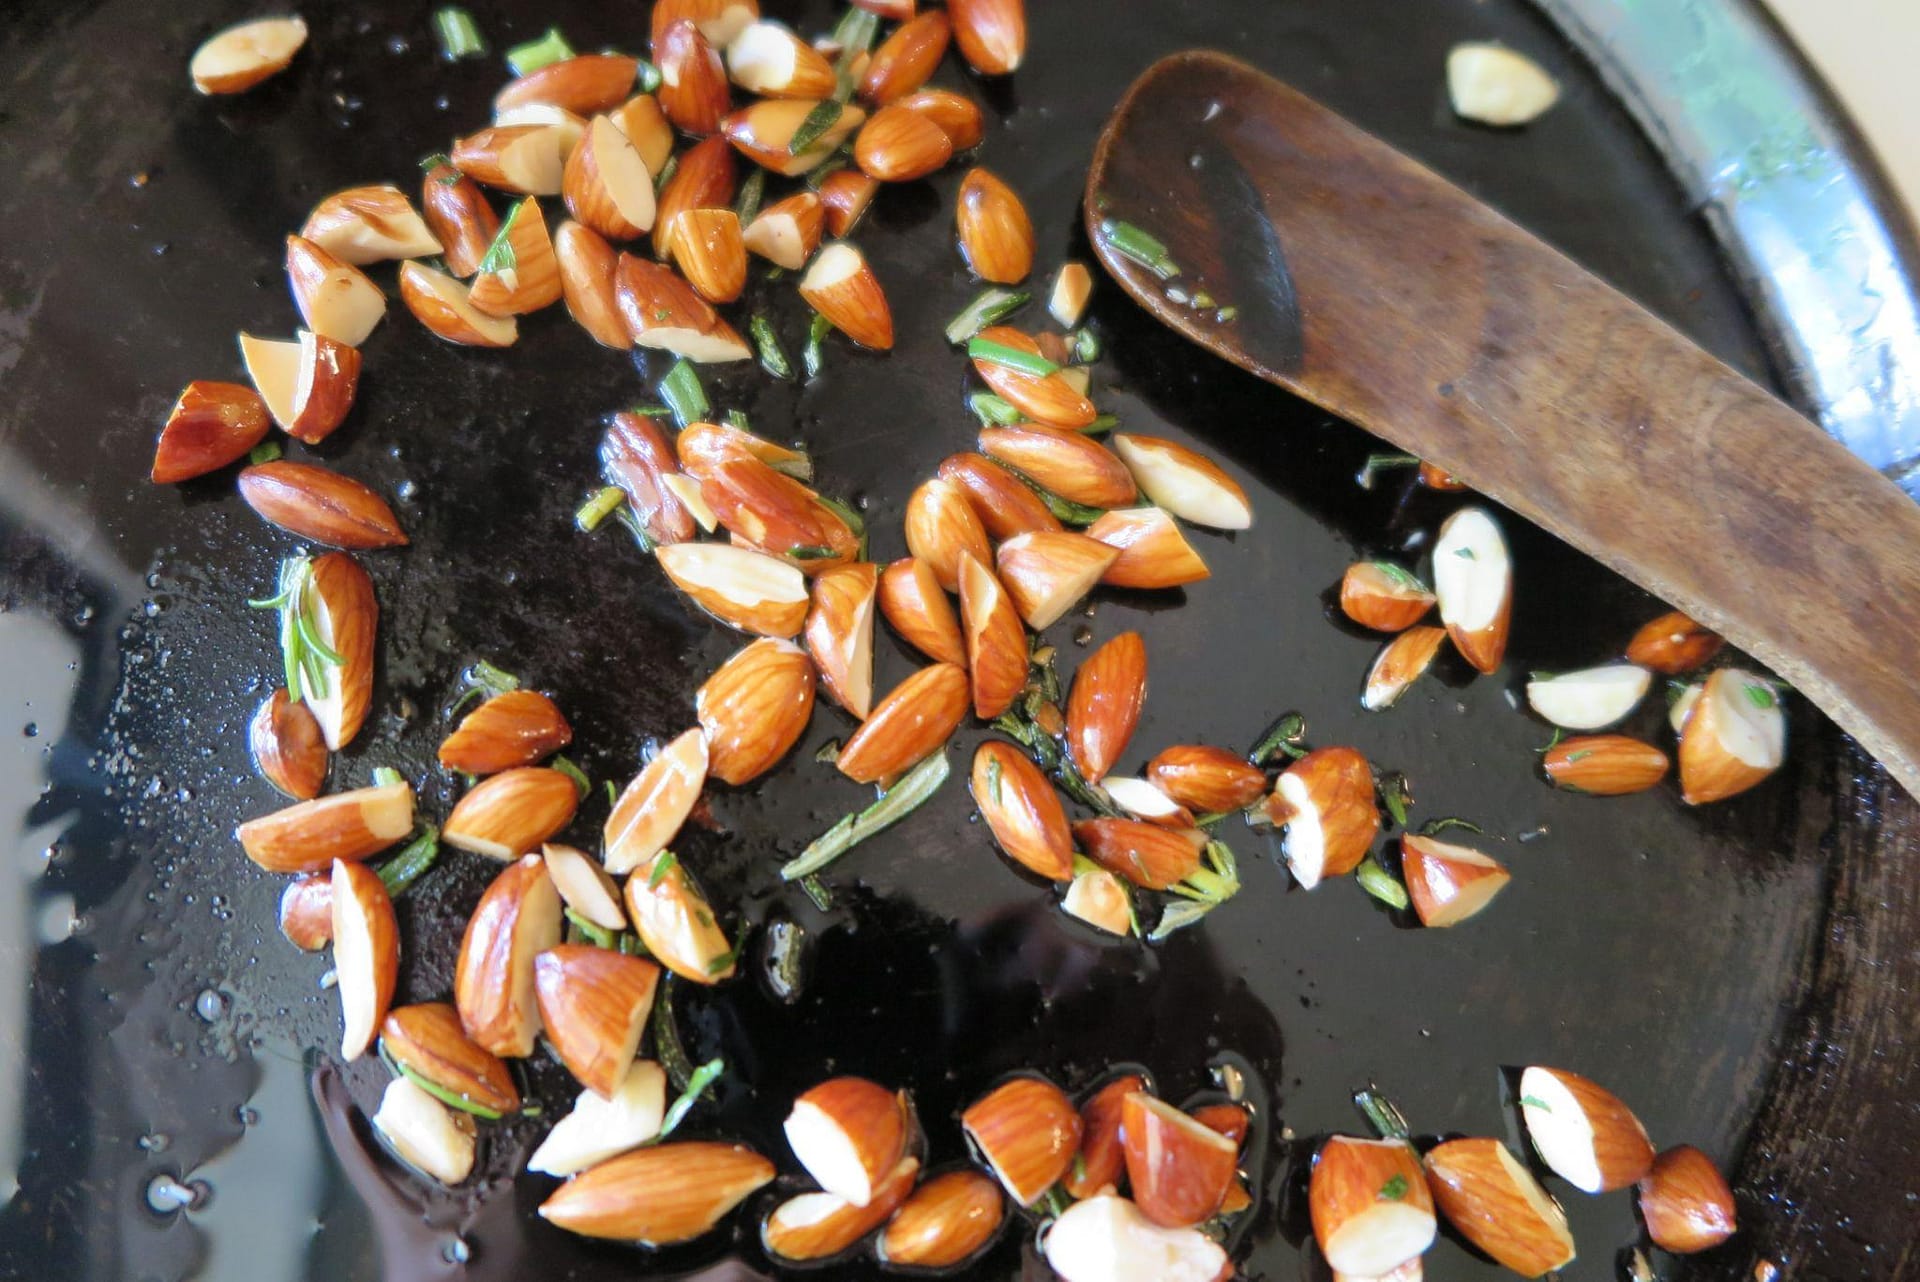 Chopped almonds in a cast iron skillet